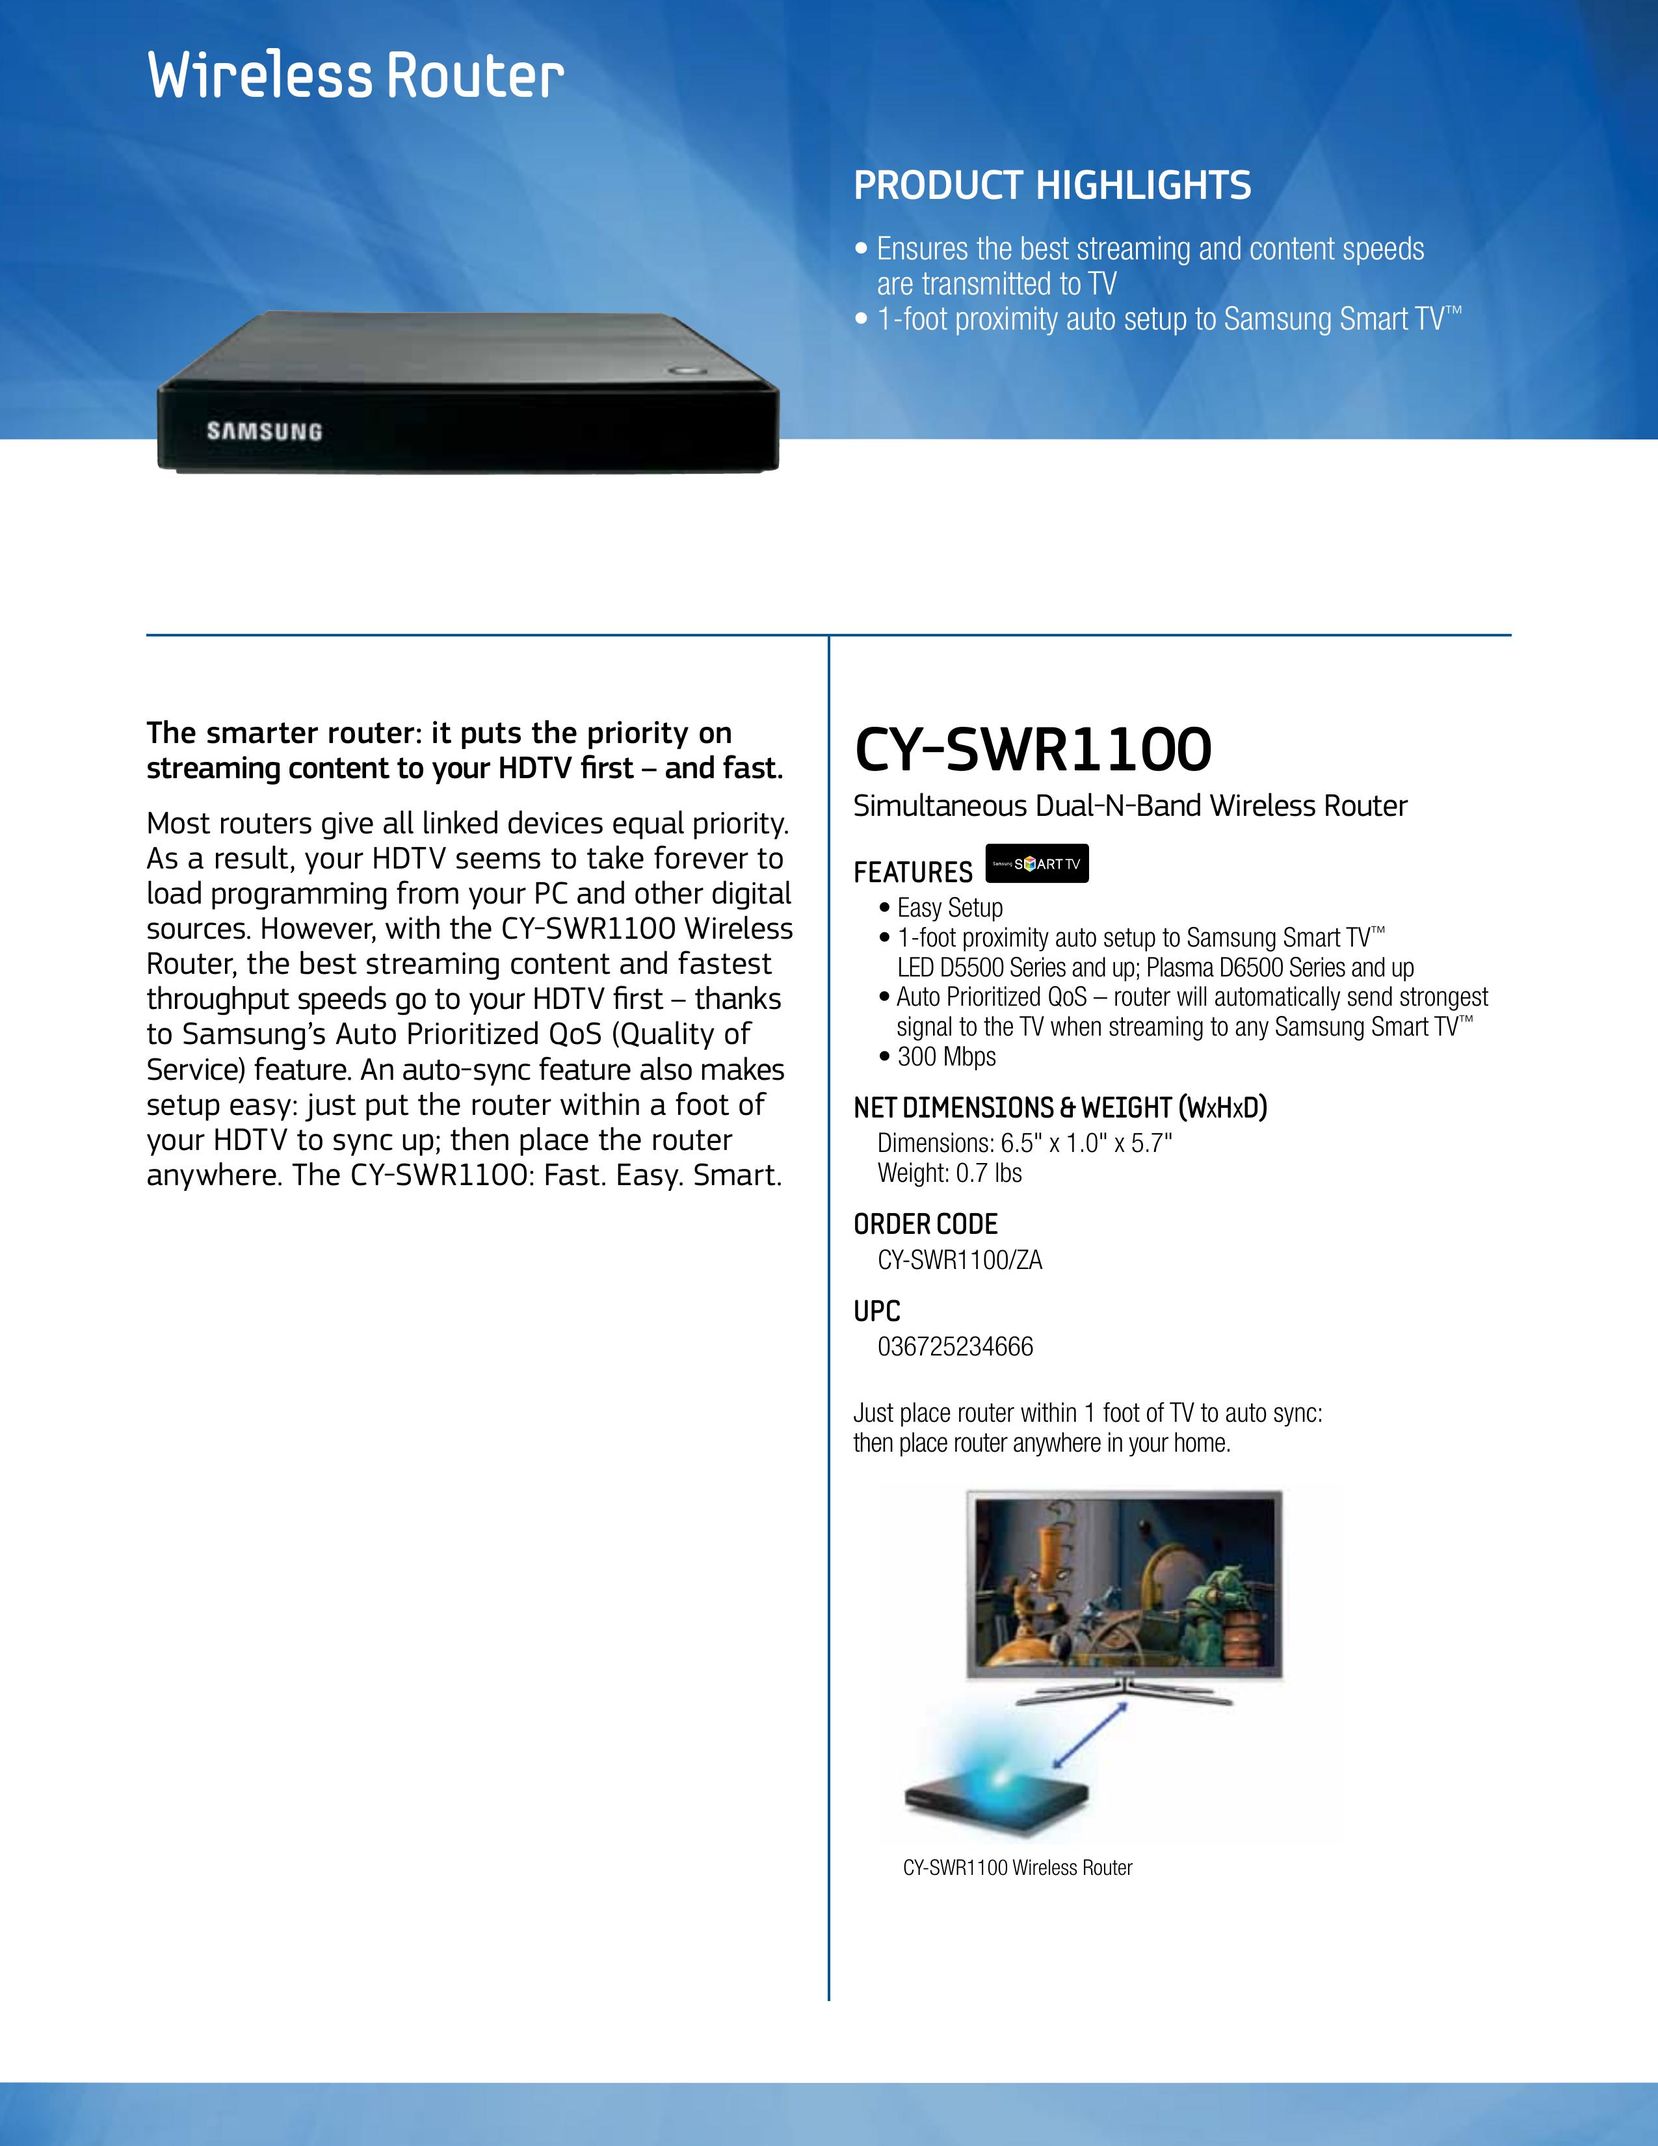 Samsung CYSWR1100 Router User Manual